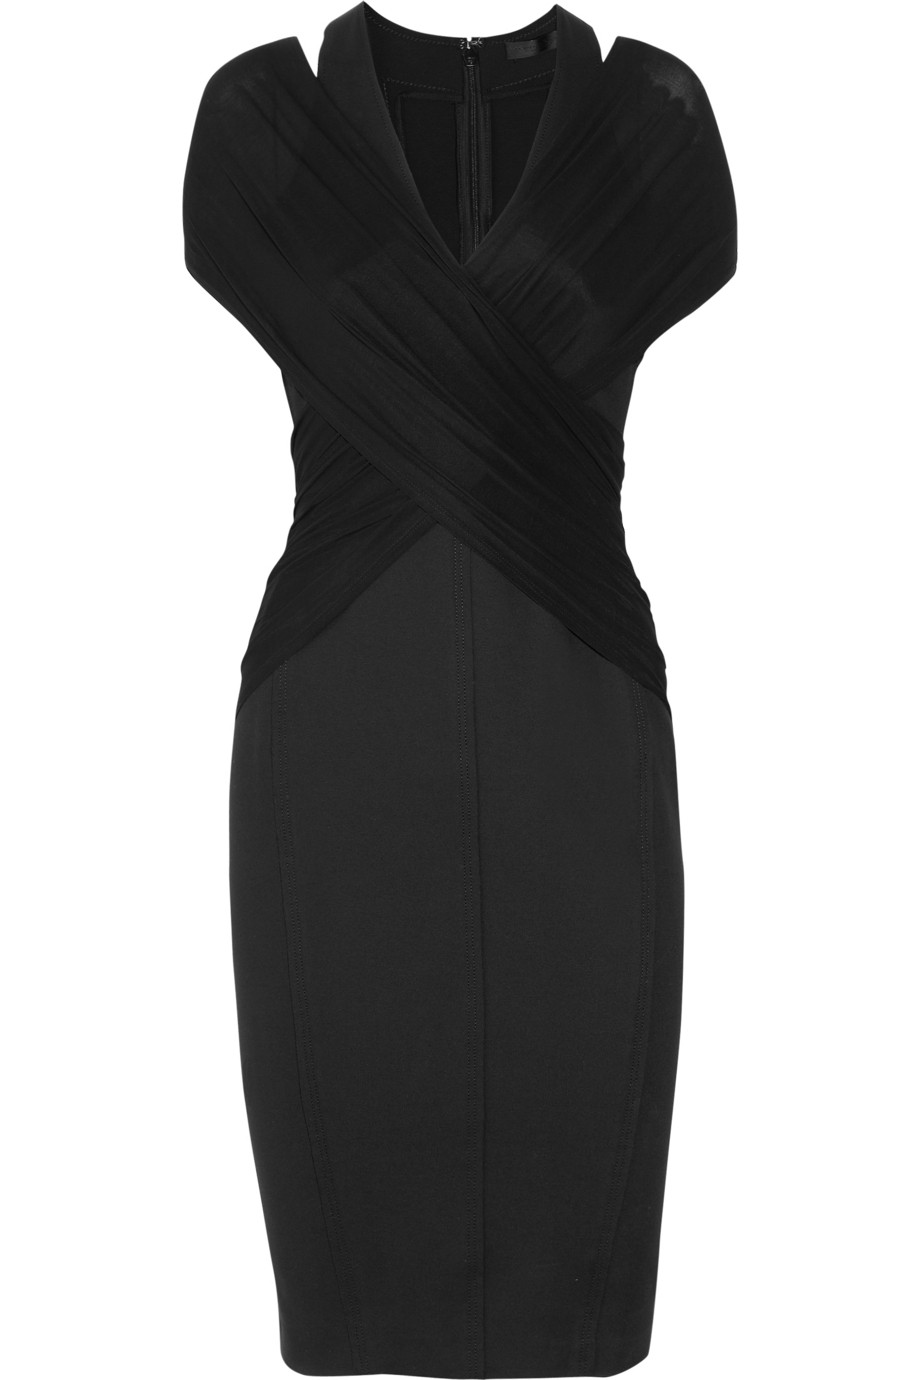 Lyst - Donna karan Stretchcrepe and Ruched Jersey Dress in Black